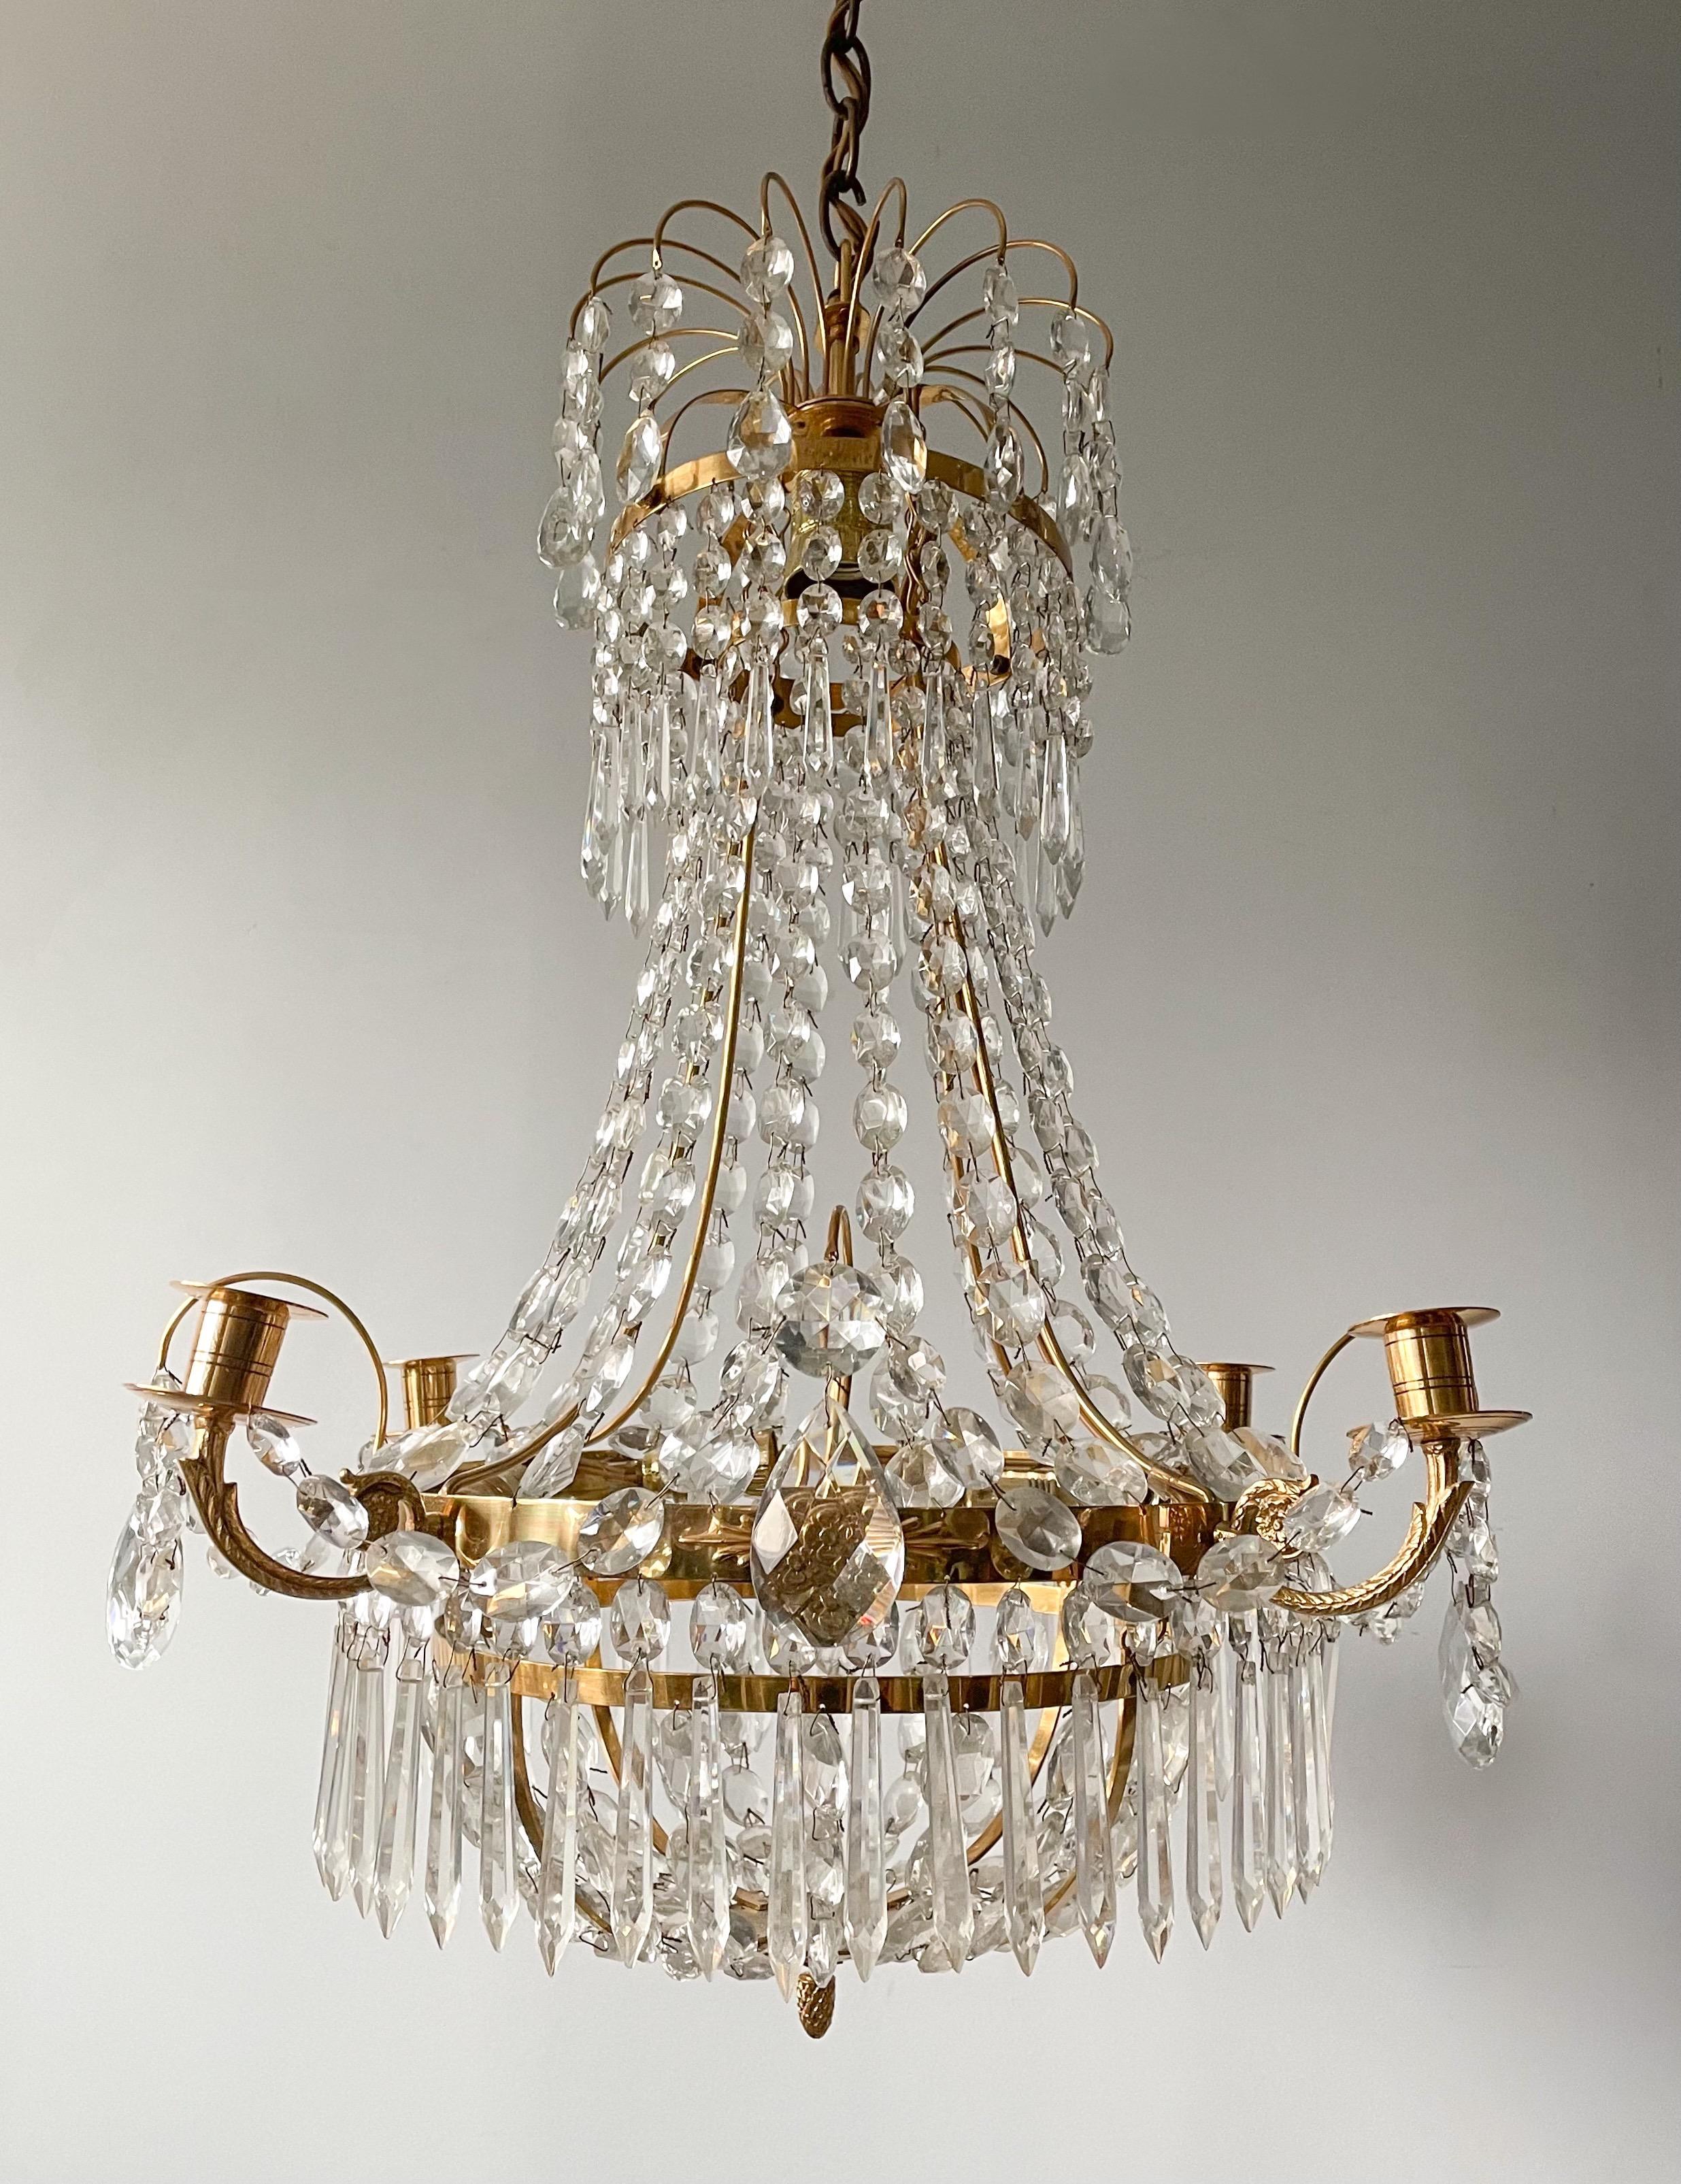 Wonderful, vintage Swedish crystal chandelier in the Gustavian style. 

The chandelier consists of a polished brass frame decorated with crystal beads and prisms in a variety of shapes. 

The chandelier is wired for electricity, there are 5